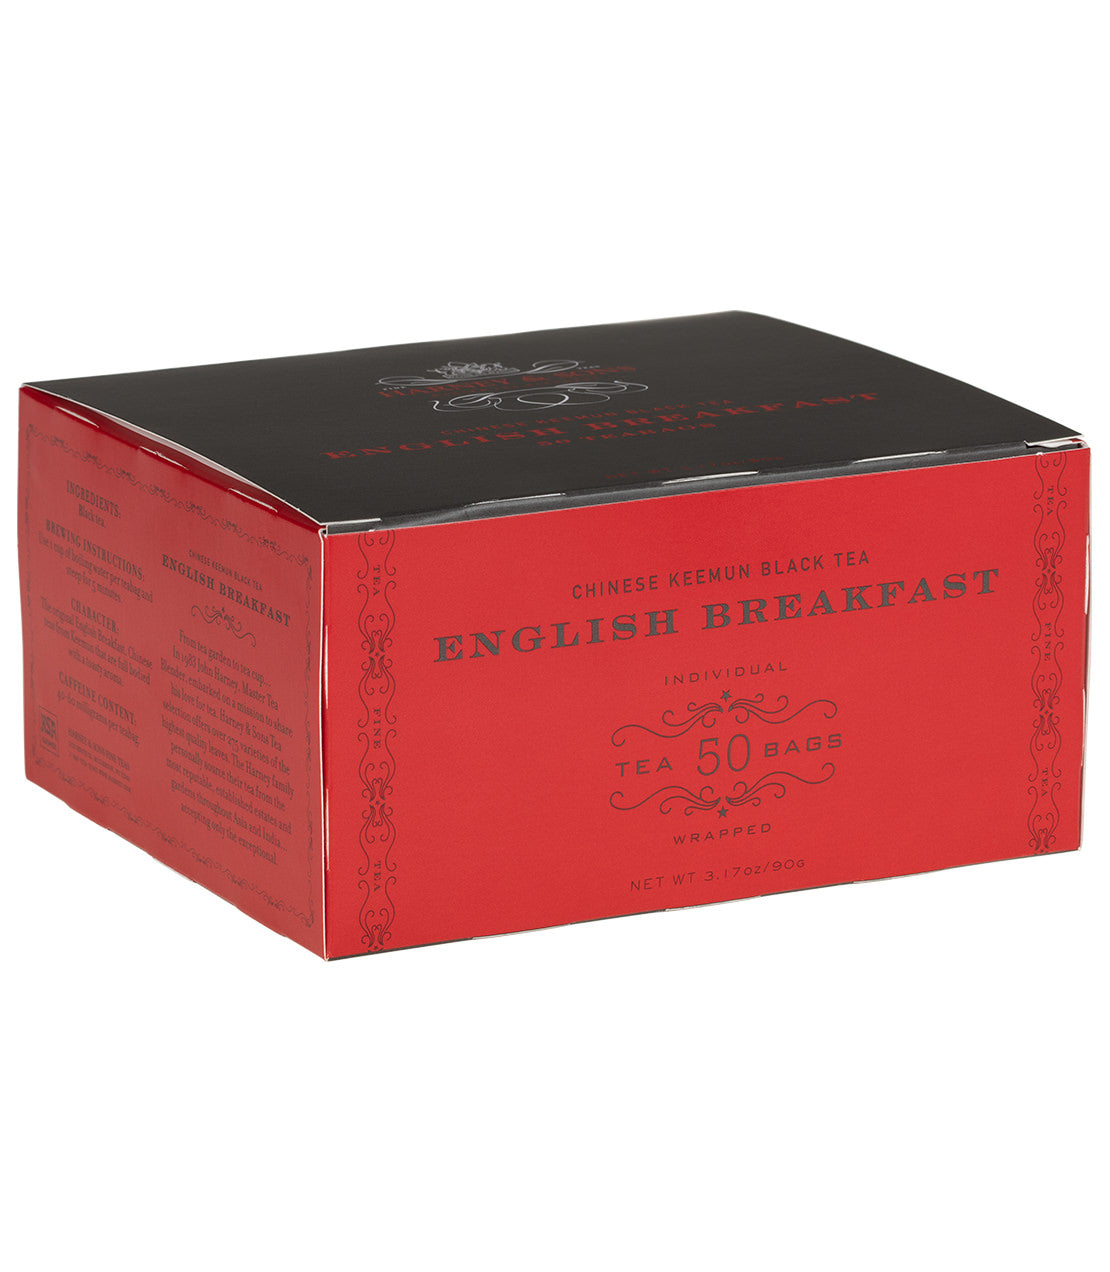 English Breakfast, Box of 50 Foil Wrapped Teabags - Teabags Box of 50 Foil Wrapped Teabags - Harney & Sons Fine Teas